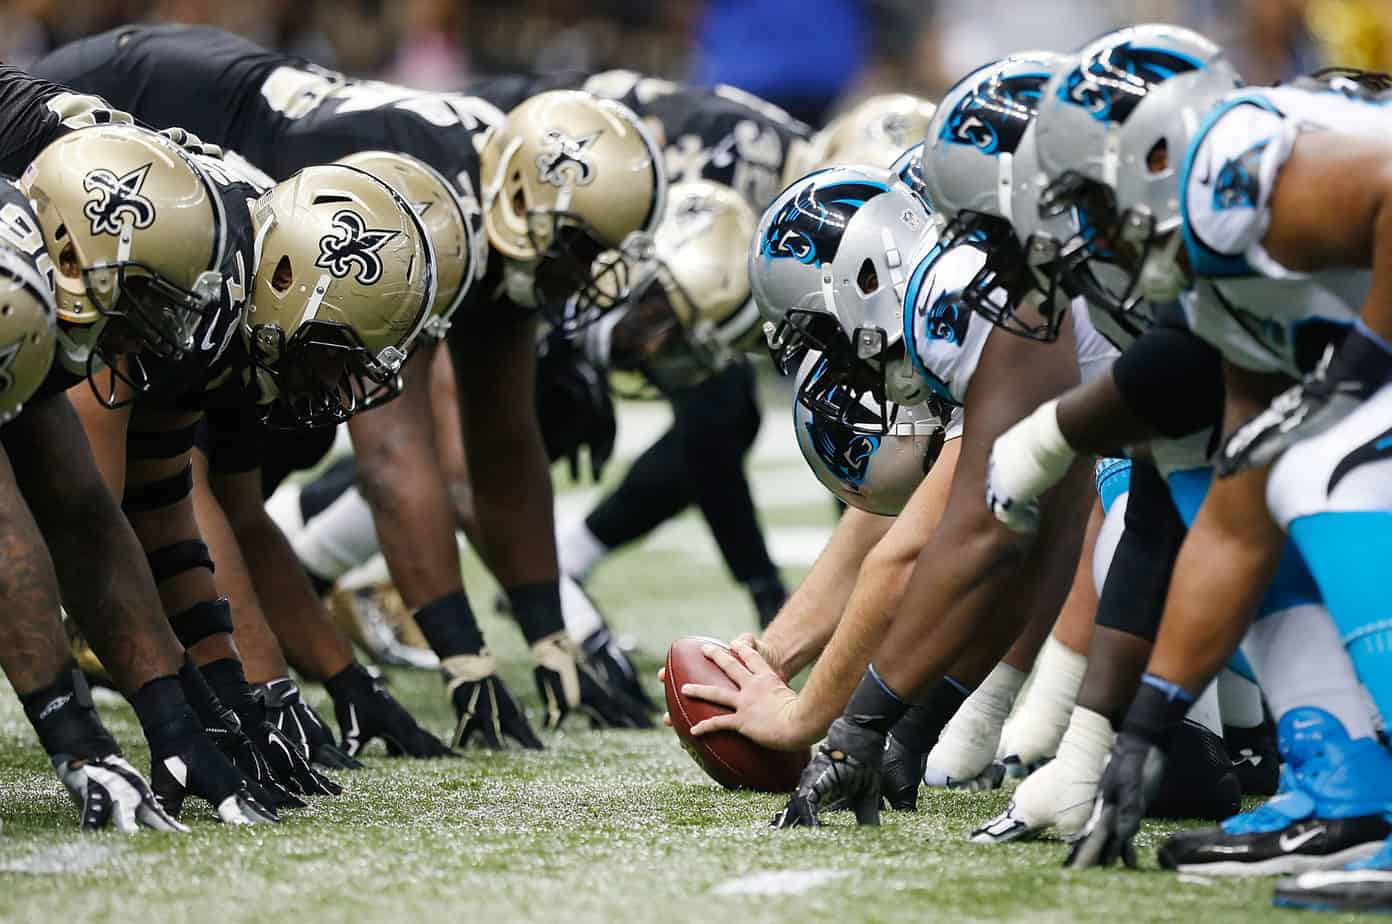 Carolina Panthers vs. New Orleans Saints – Betting Odds and Preview